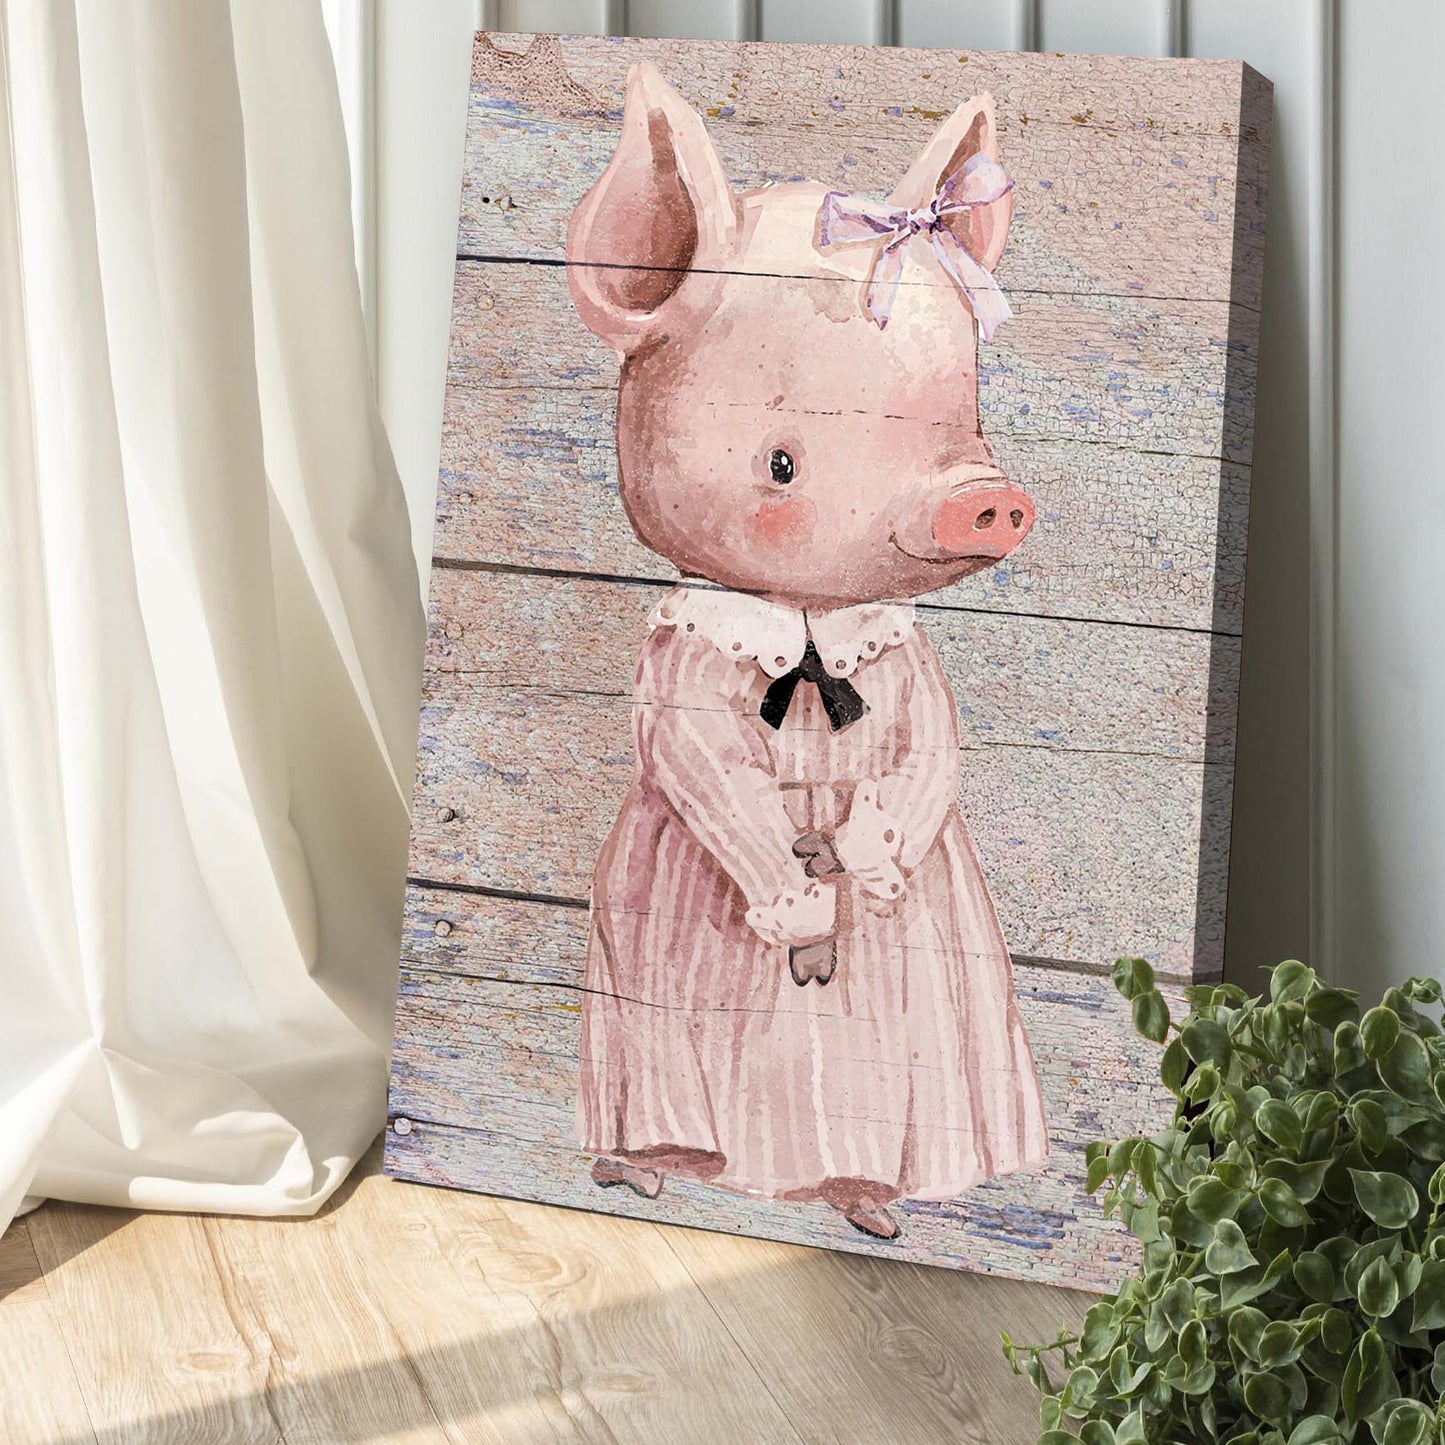 Simple Ribbon Dress Pig Canvas Wall Art Style 1 - Image by Tailored Canvases